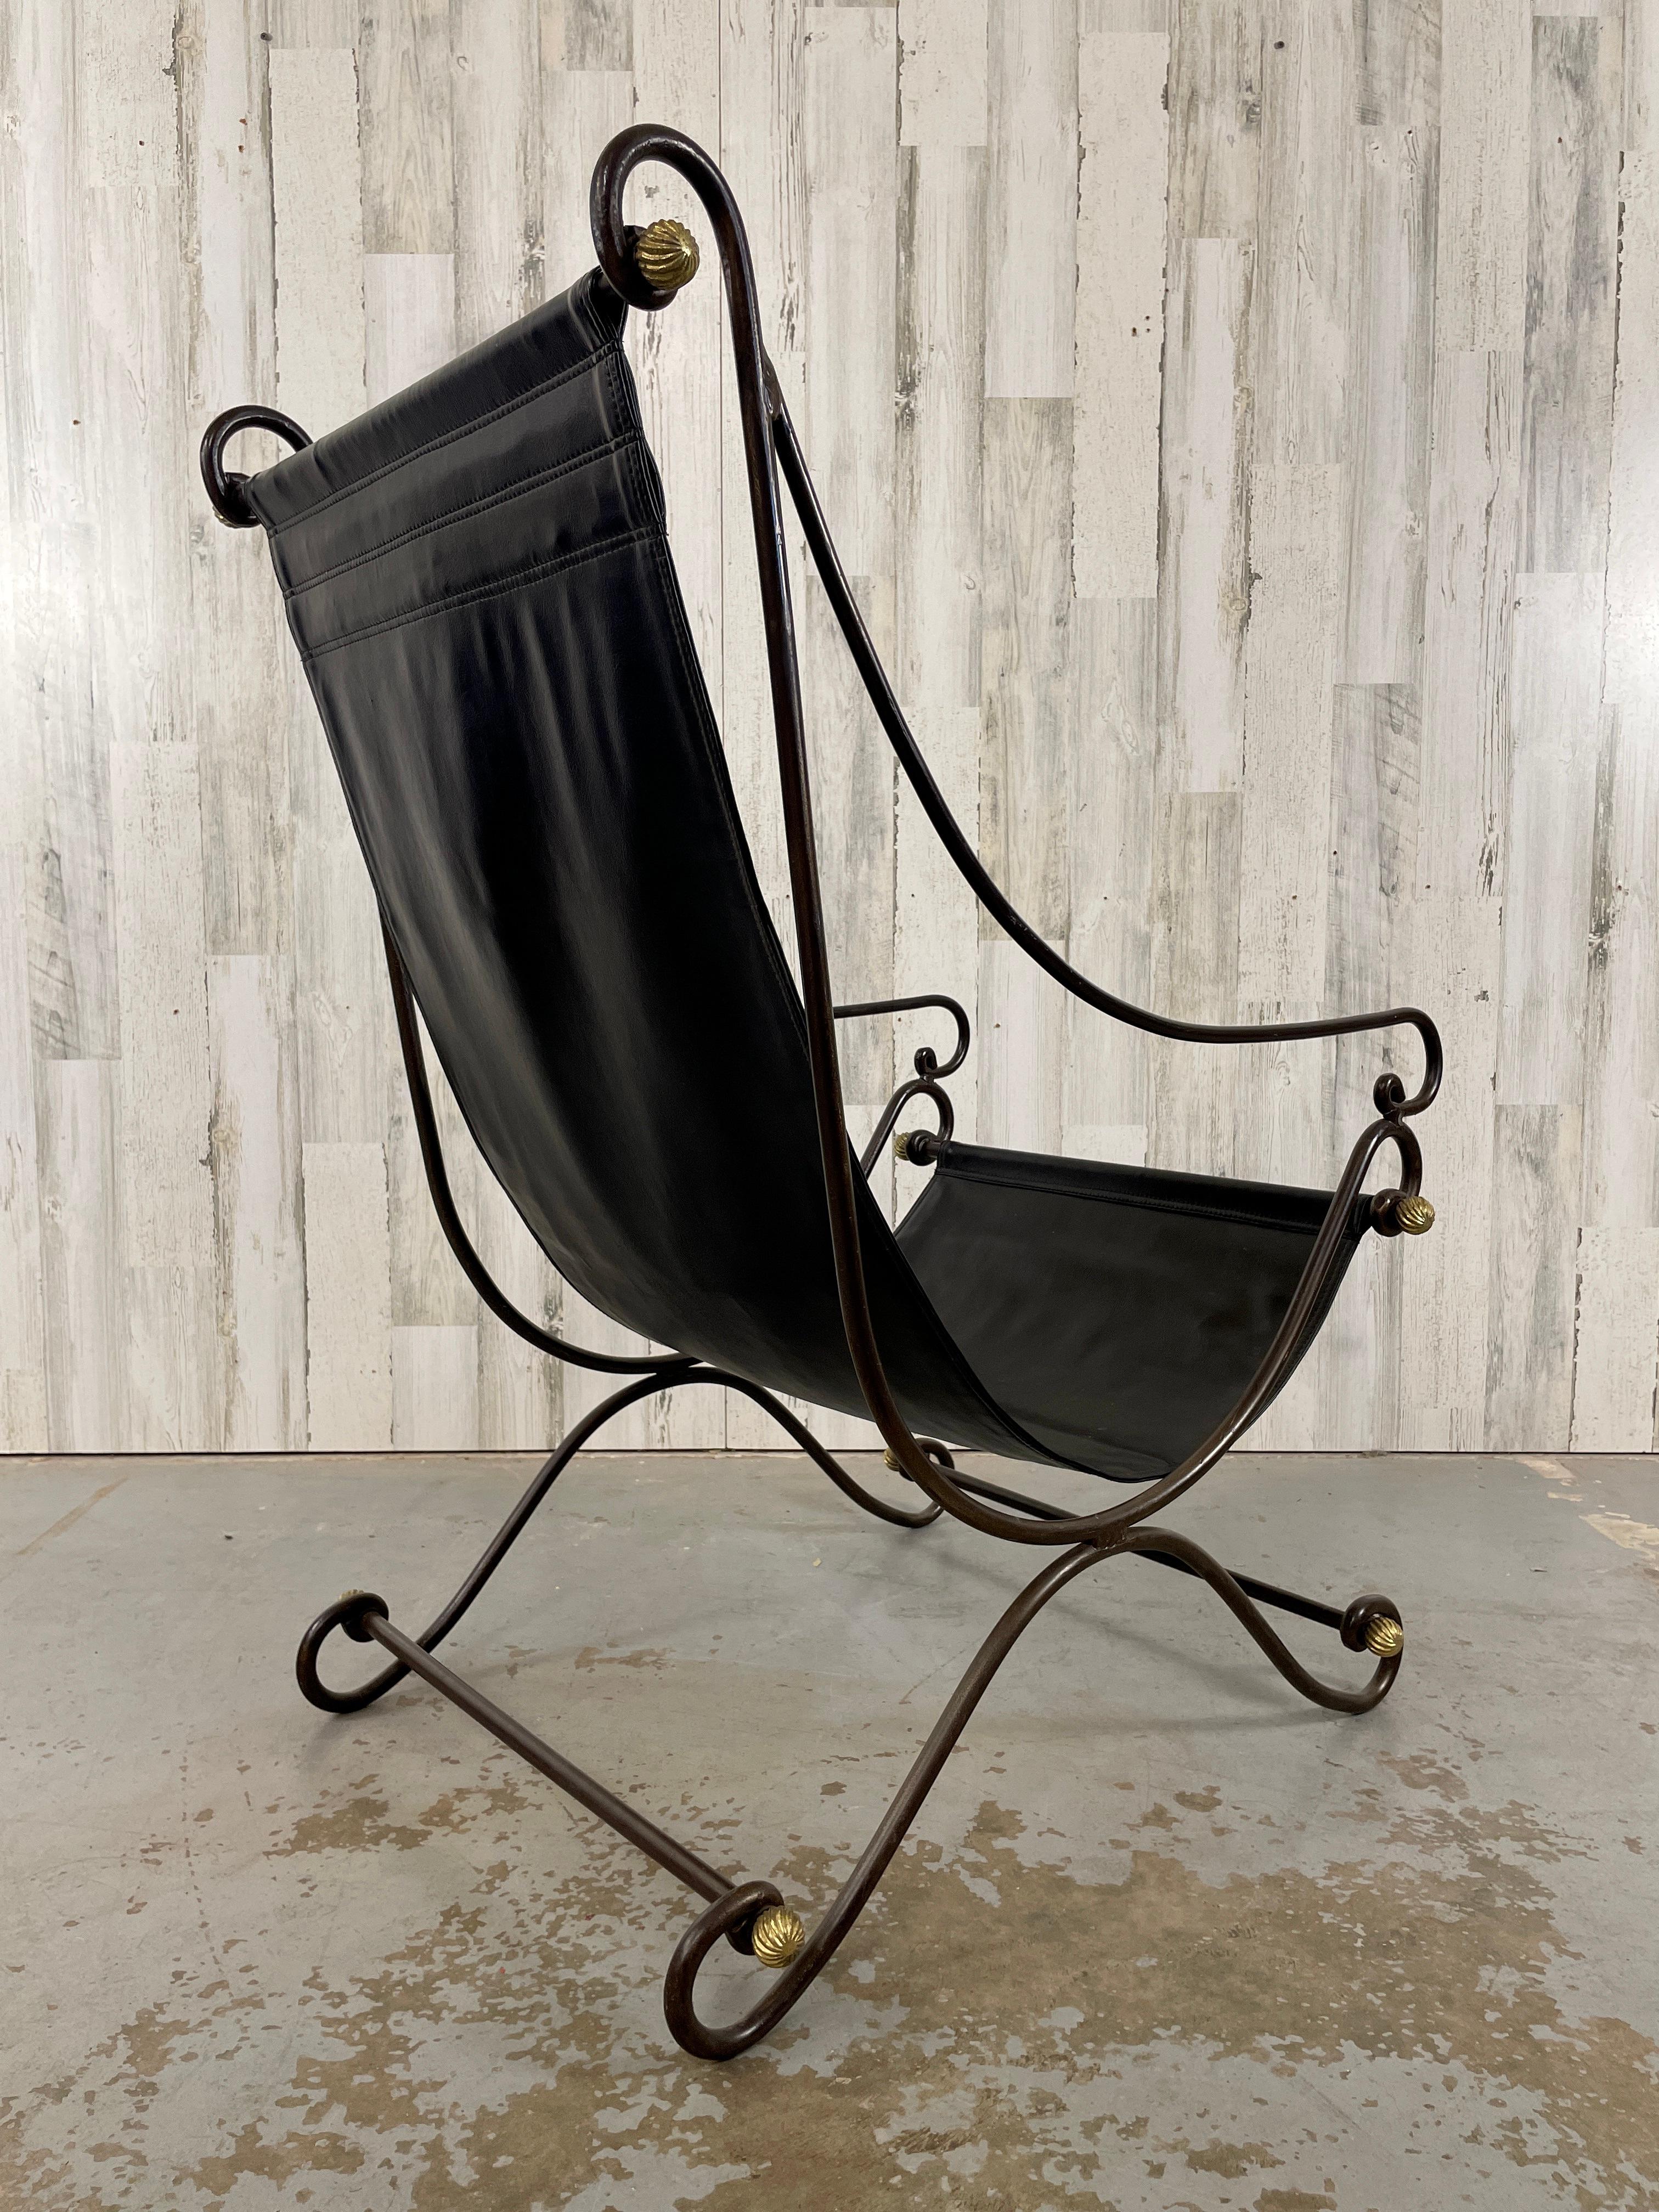 David Hicks Wrought Iron & Leather Sling Chair  In Good Condition For Sale In Denton, TX